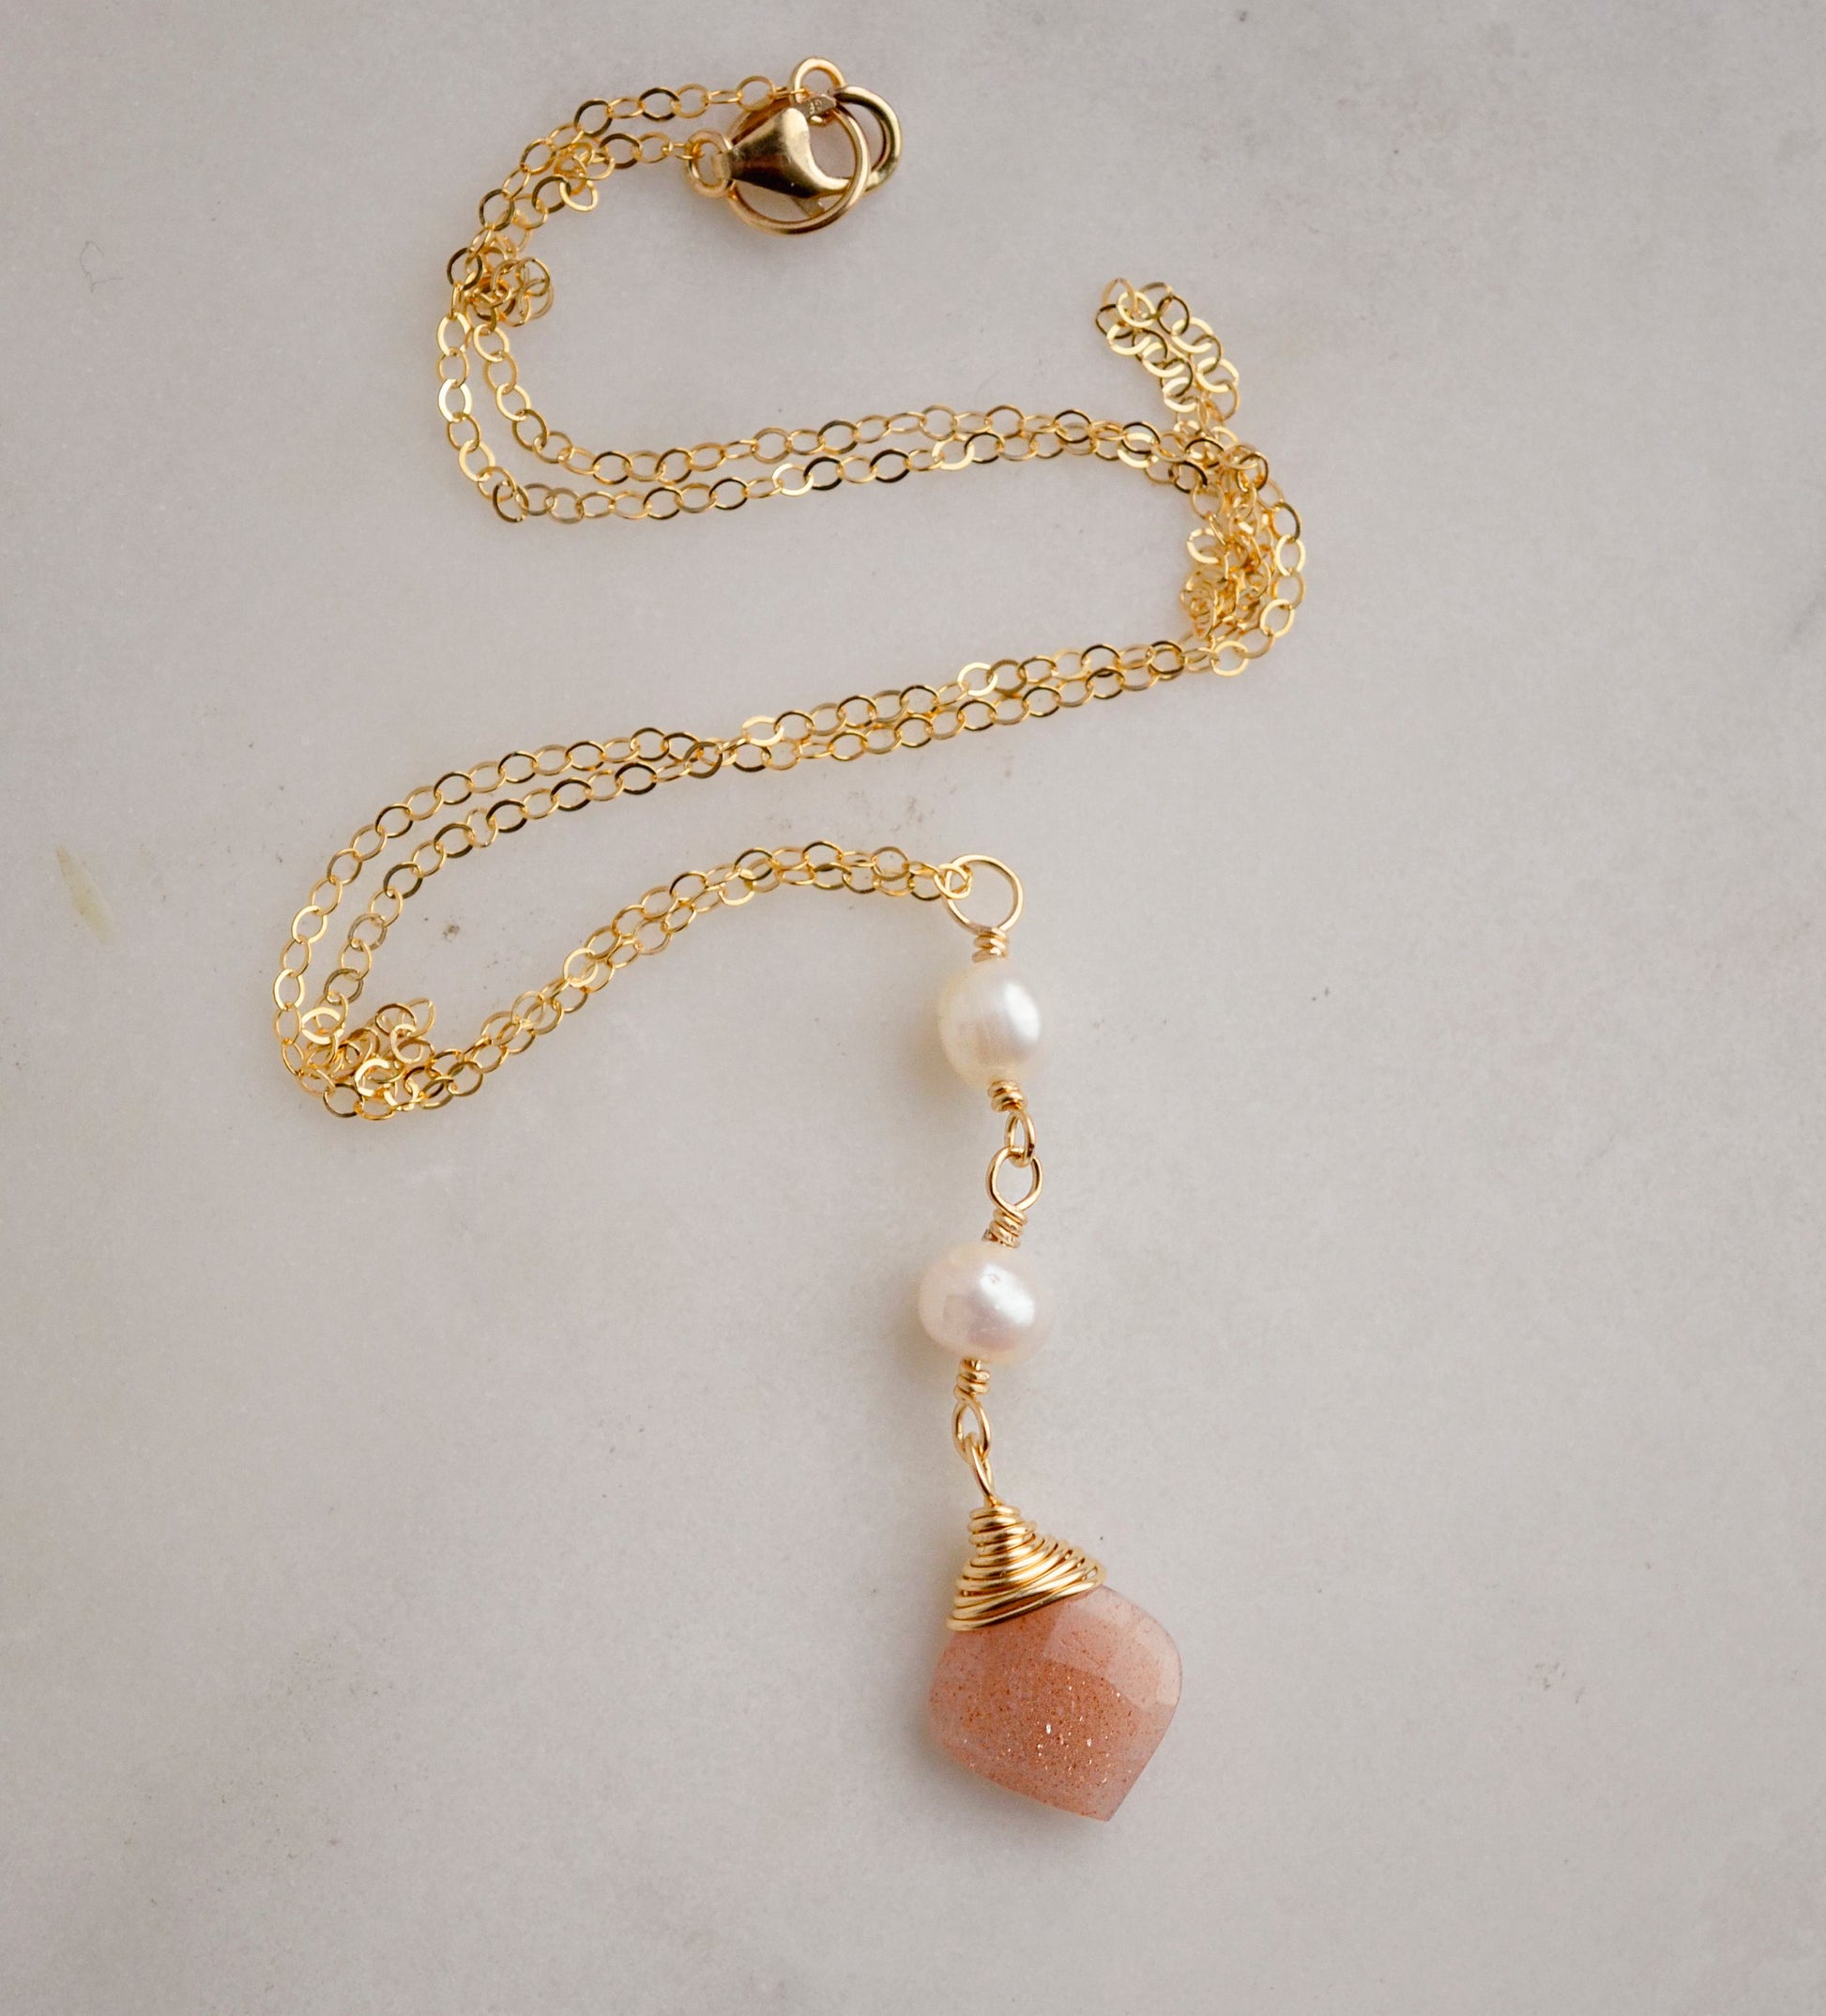 Two white semi-round pearls hang over a natural peach Moonstone faceted drop. The gold style pendant is shown.